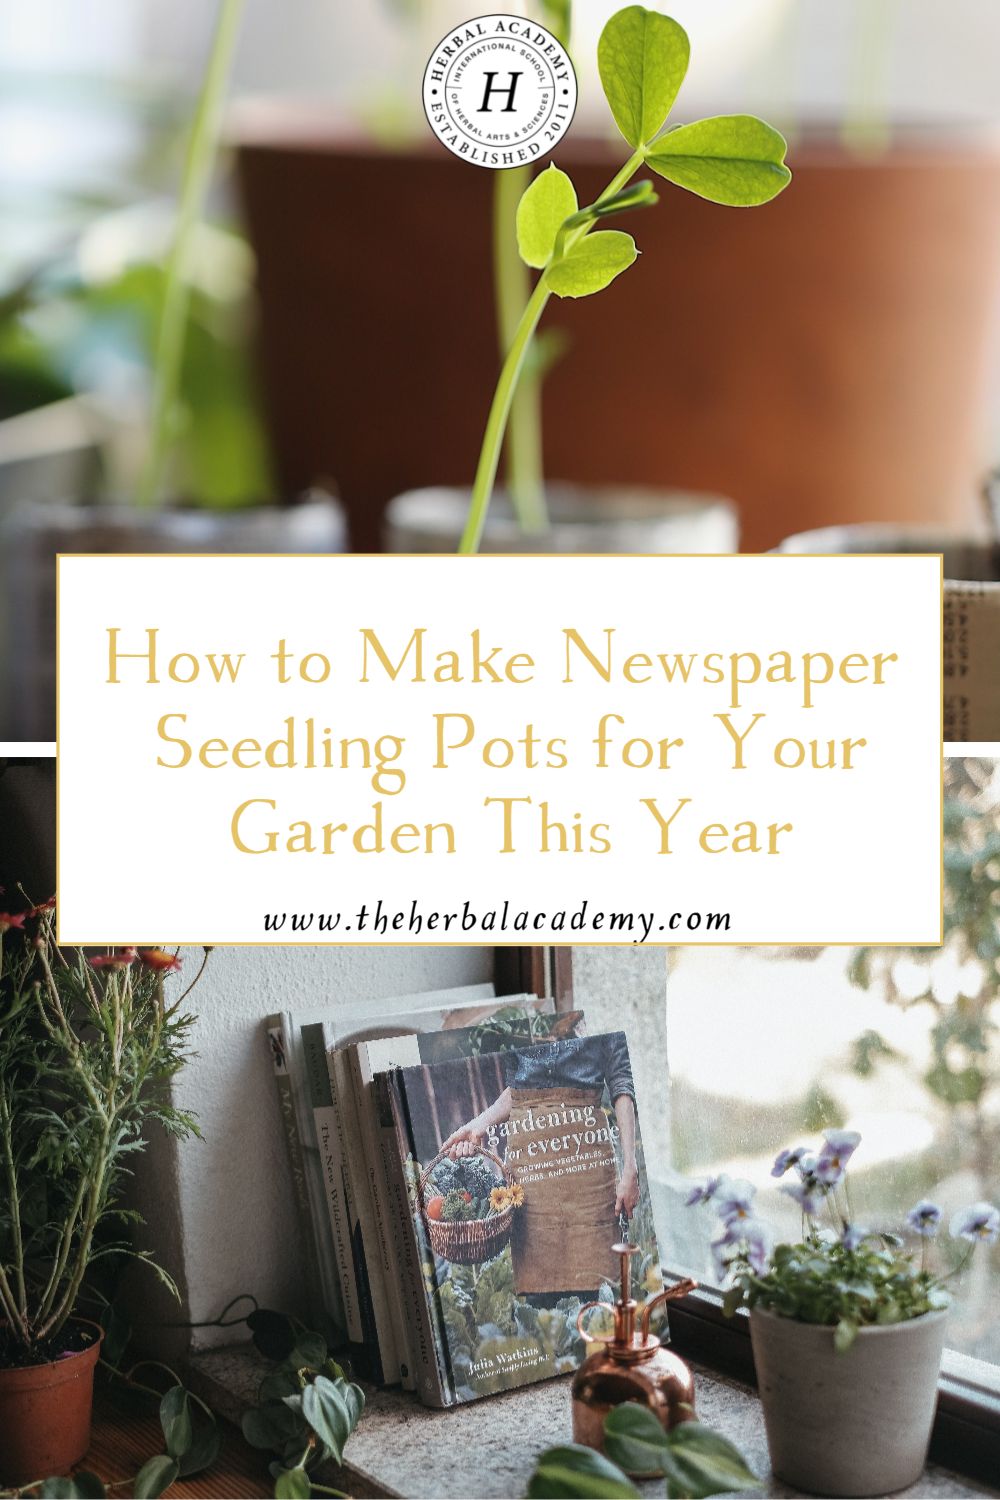 How to Make Newspaper Seedling Pots for Your Garden This Year | Herbal Academy | Sustainability expert Julia Watkins shares everything you need to know to grow your own vegetables - including DIY newspaper seedling pots!